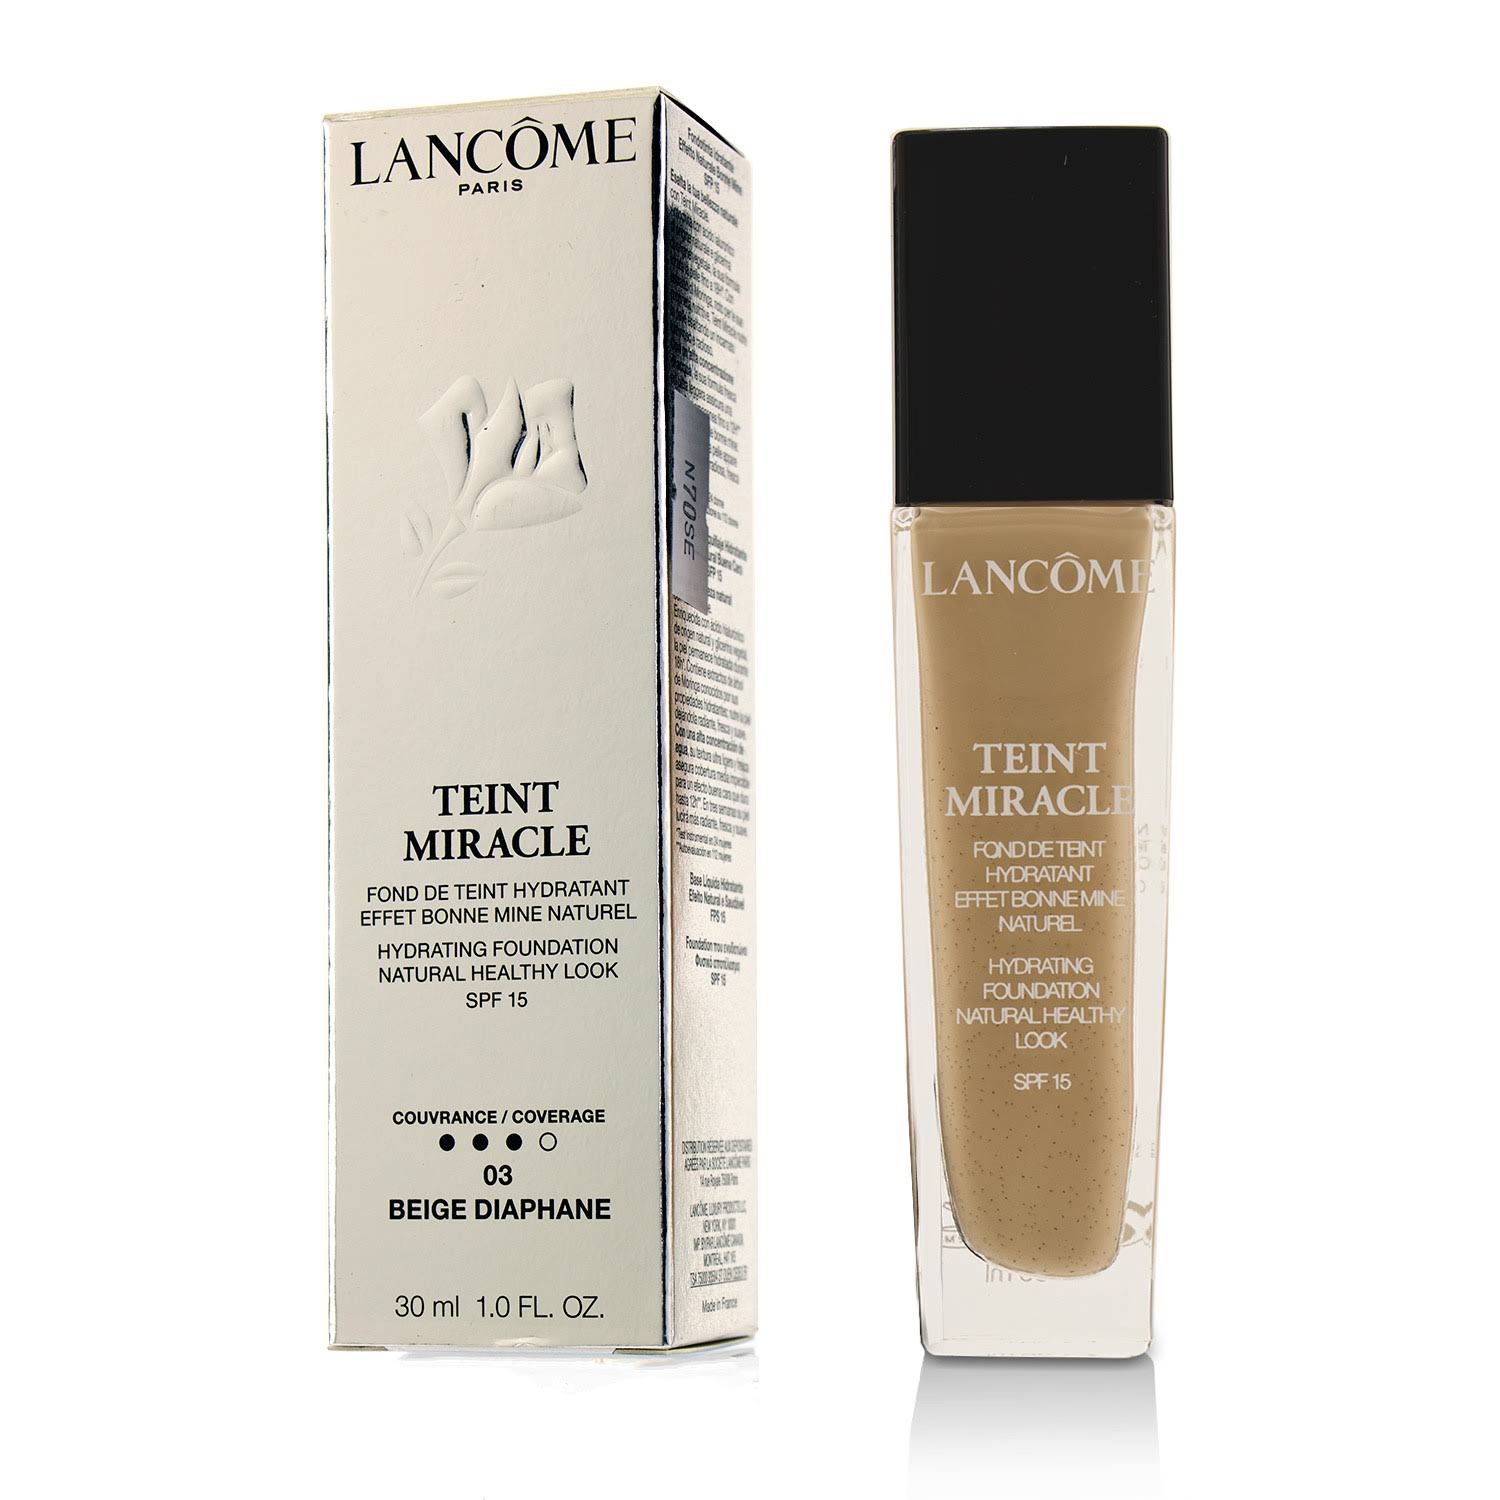 Lancome Teint Miracle Hydrating Foundation - #03 Beige Diaphane, 30ml